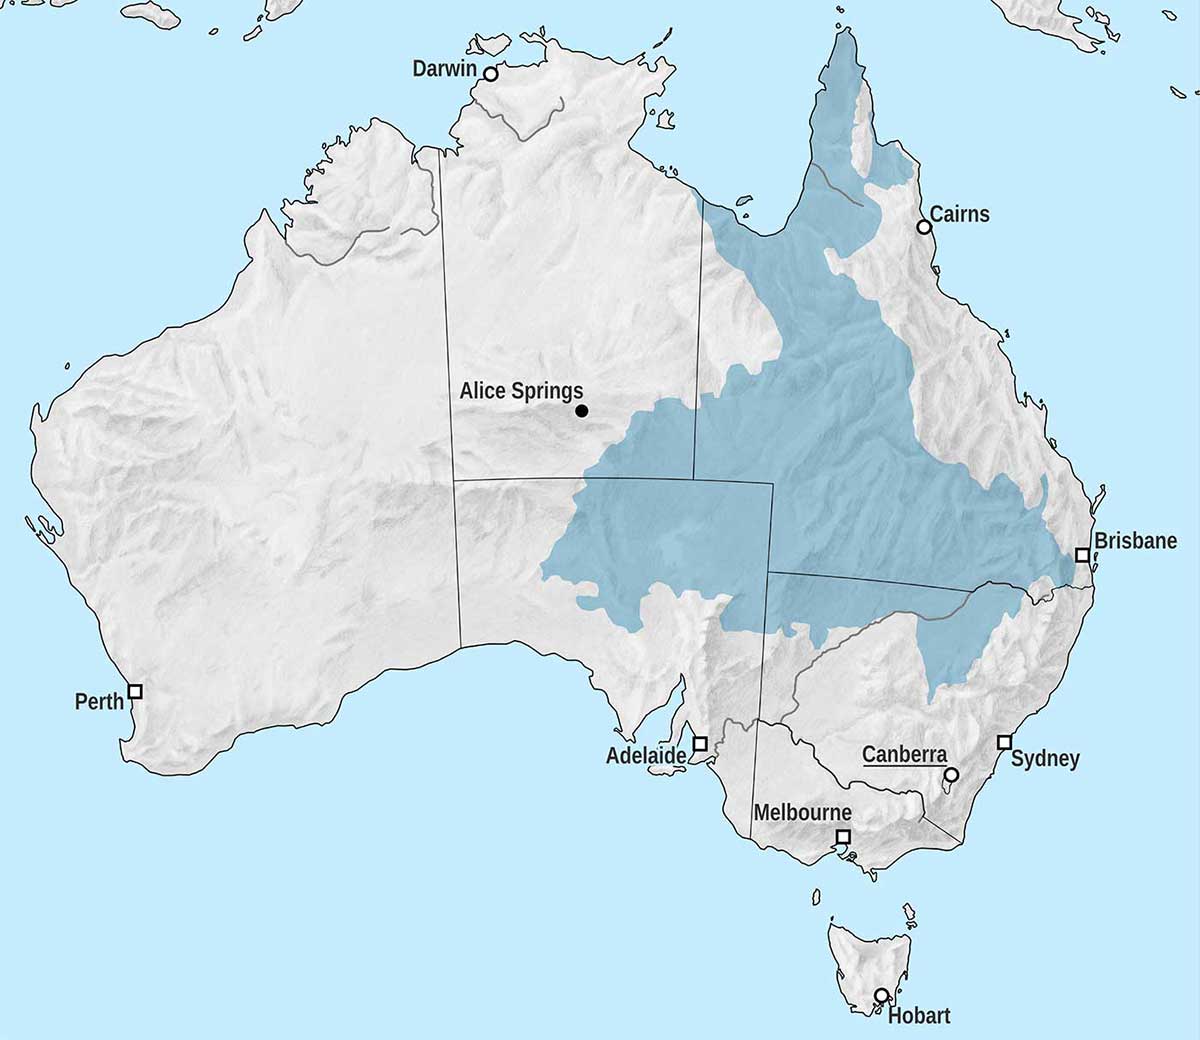 Map of Australia showing the Great Artesian Basin, which covers most of Queensland and stretches into the Northern Territory, South Australia and New South Wales.  - click to view larger image